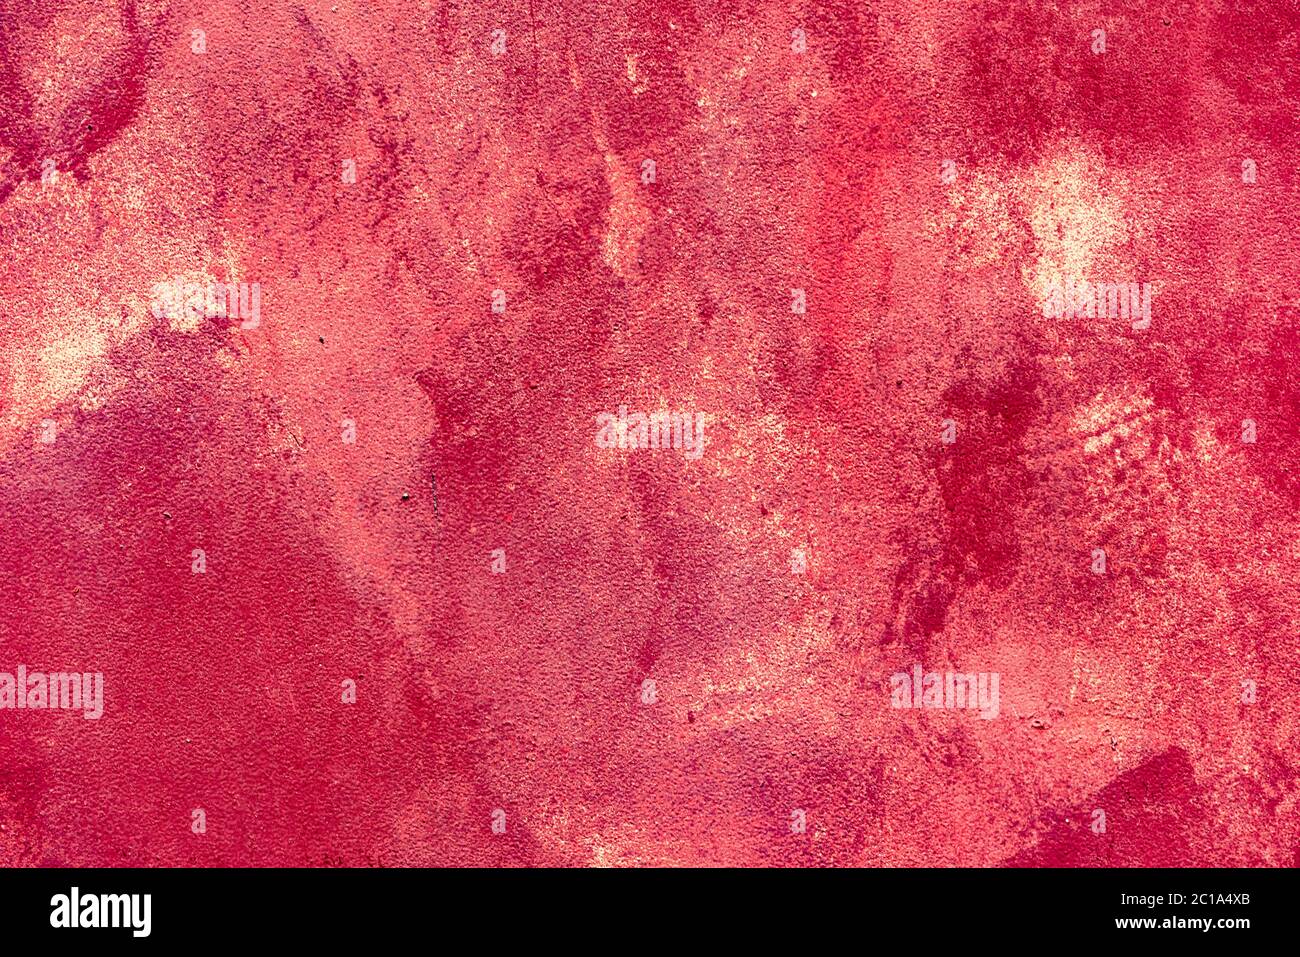 Red metal grunge texture background. Rough red painted rusty metal surface,  high resolution texture Stock Photo - Alamy